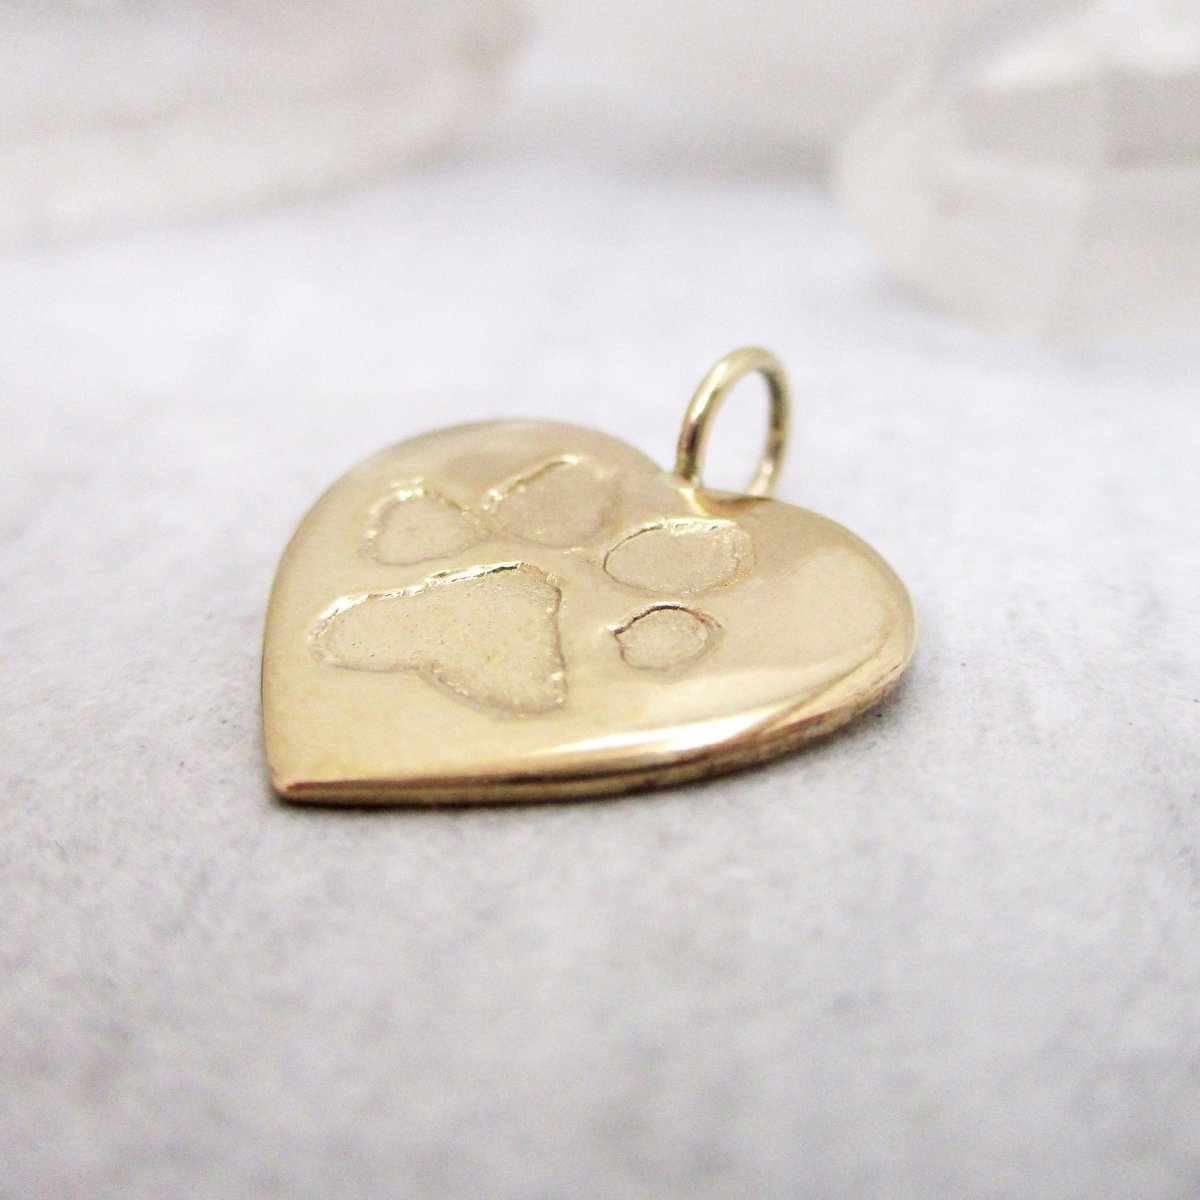 Your Dog's or Cat's Paw Print Heart in Solid 14 Karat Gold. Email us your print! - Luxe Design Jewellery